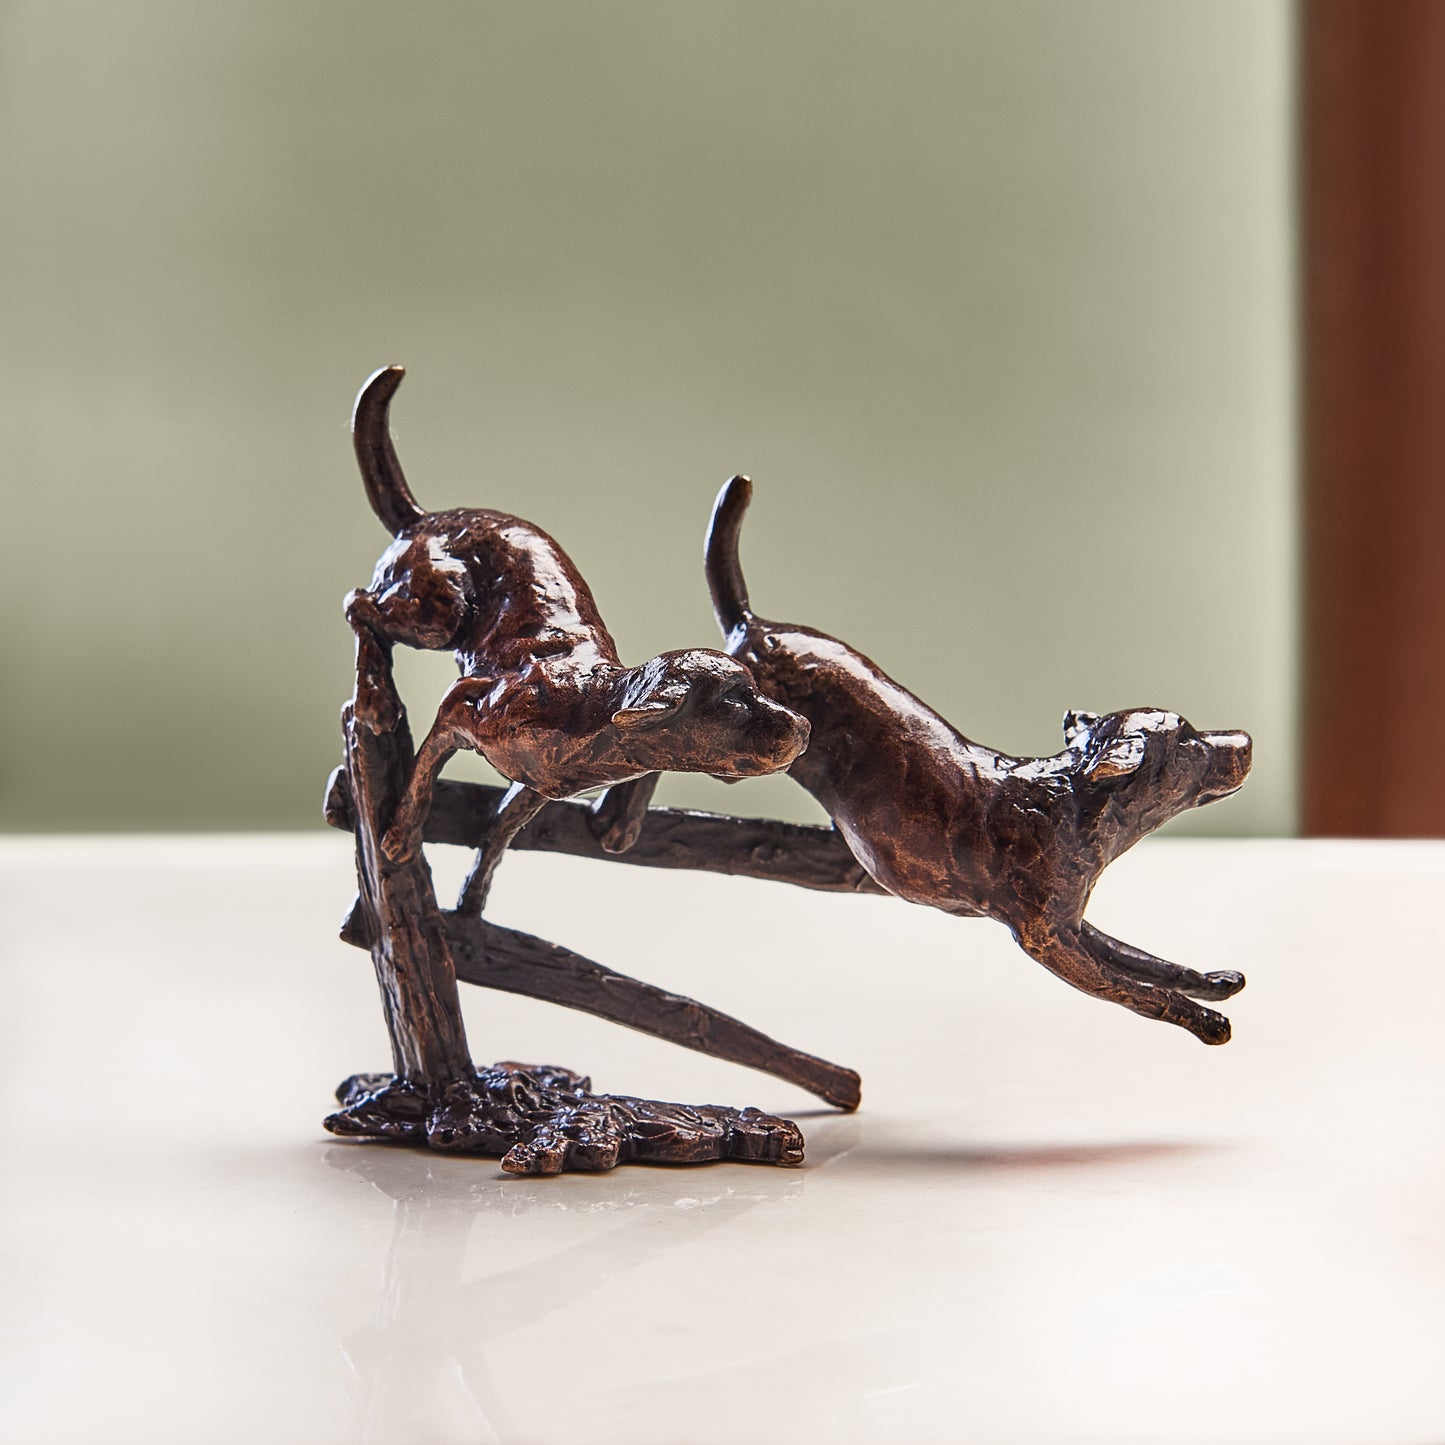 Miniature bronze figurine of two eagerly running labradors in the great outdoors. Ideal as a thoughtful birthday or bronze anniversary gift.